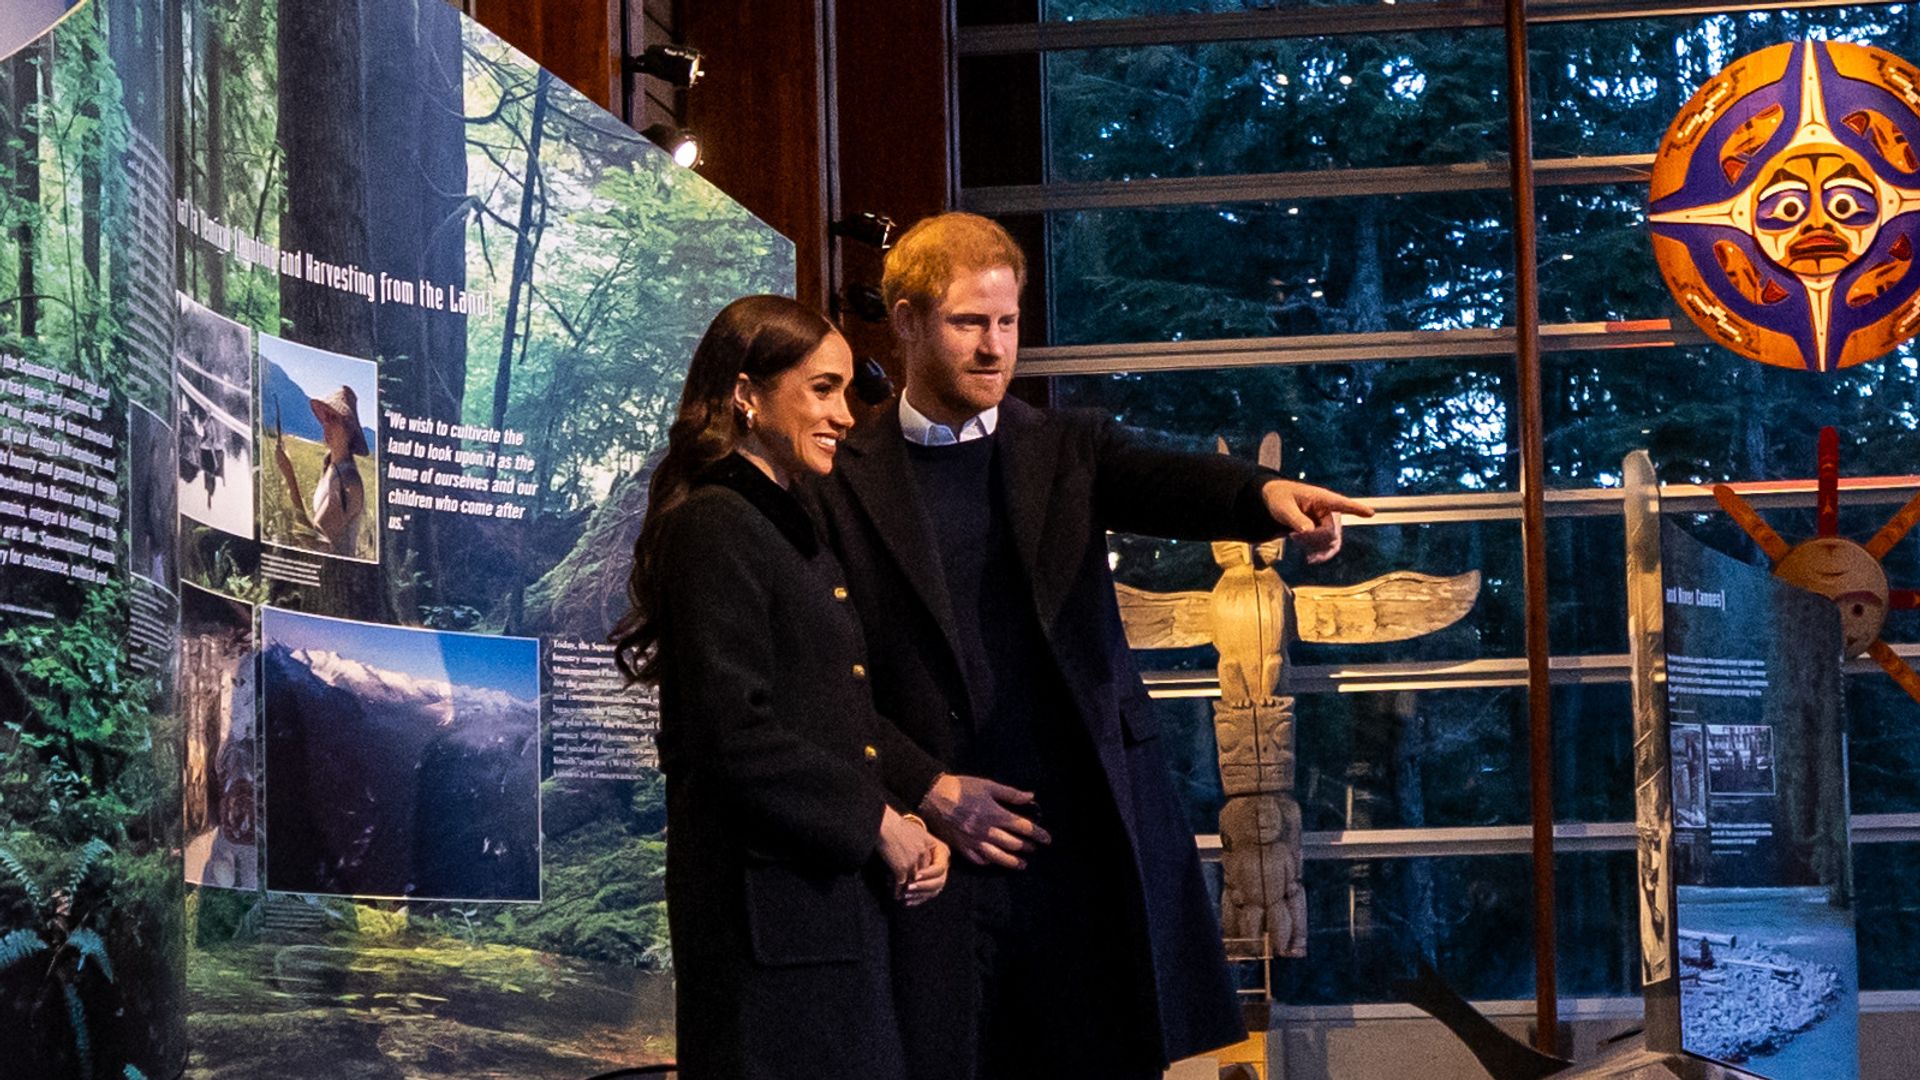 Meghan and Harry tour the Squamish Lil’wat Cultural Centre